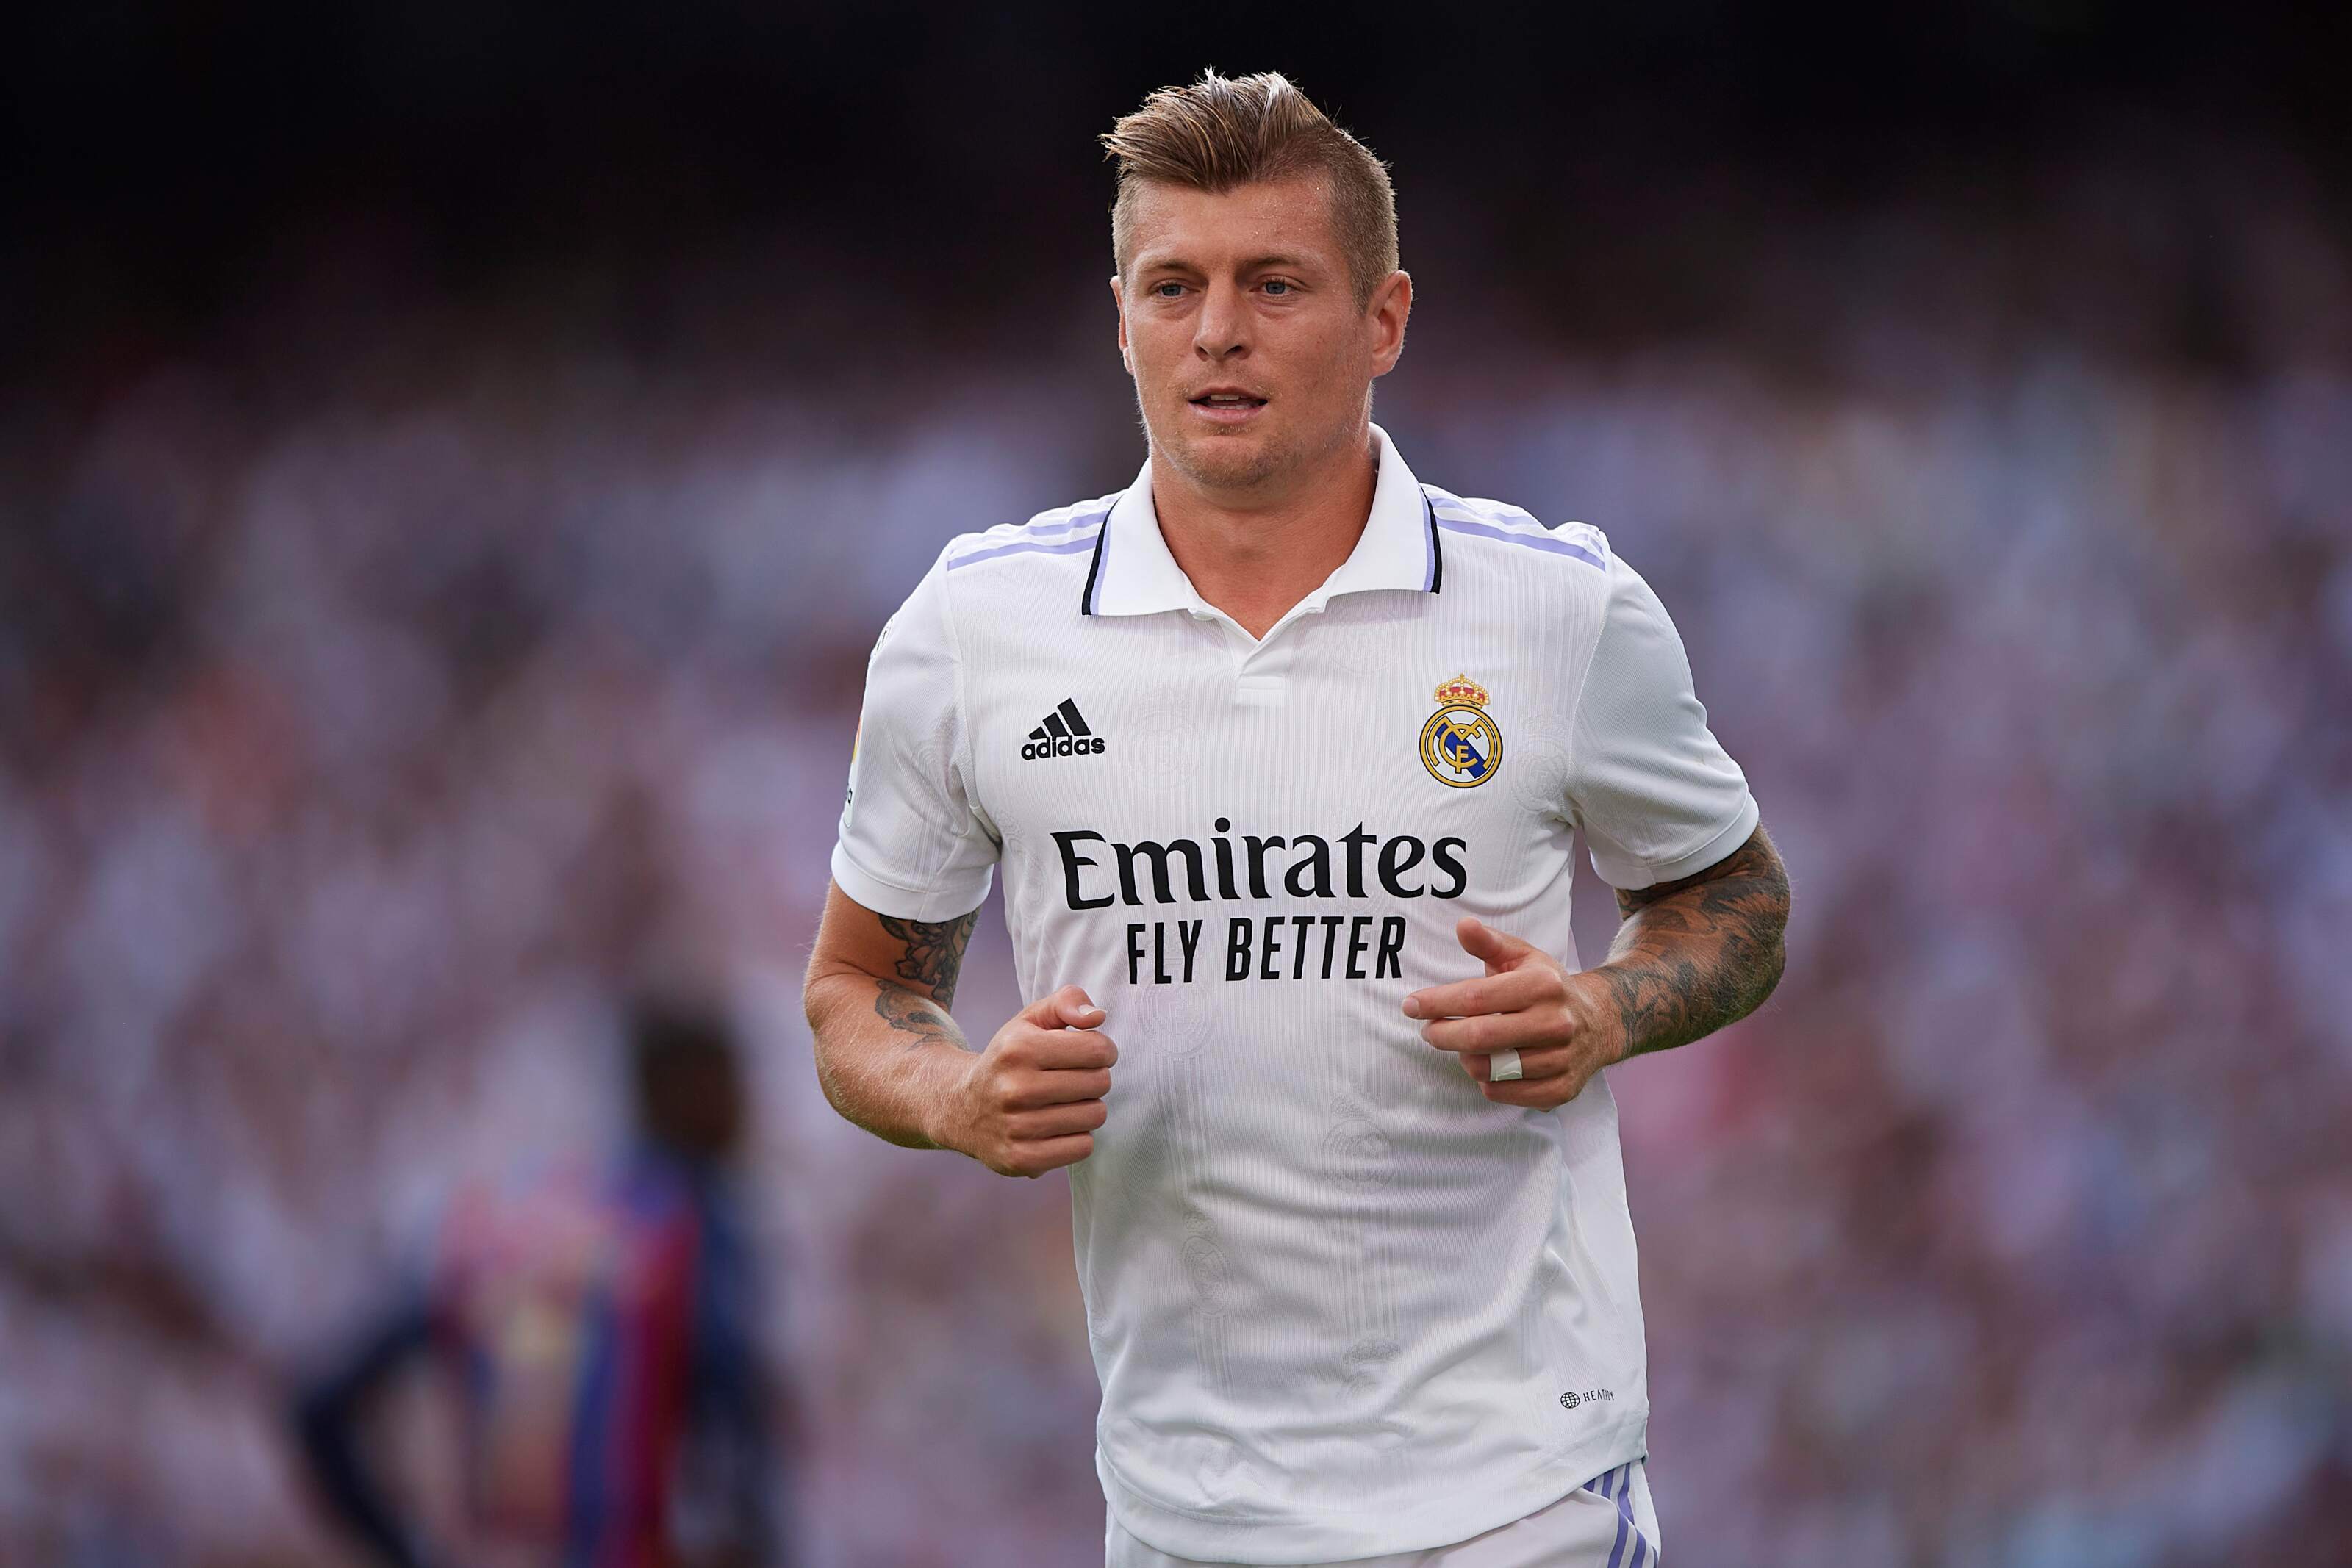 Predicted XIs Real Madrid-Atletico Madrid: One of Luka Modric or Toni Kroos dropped